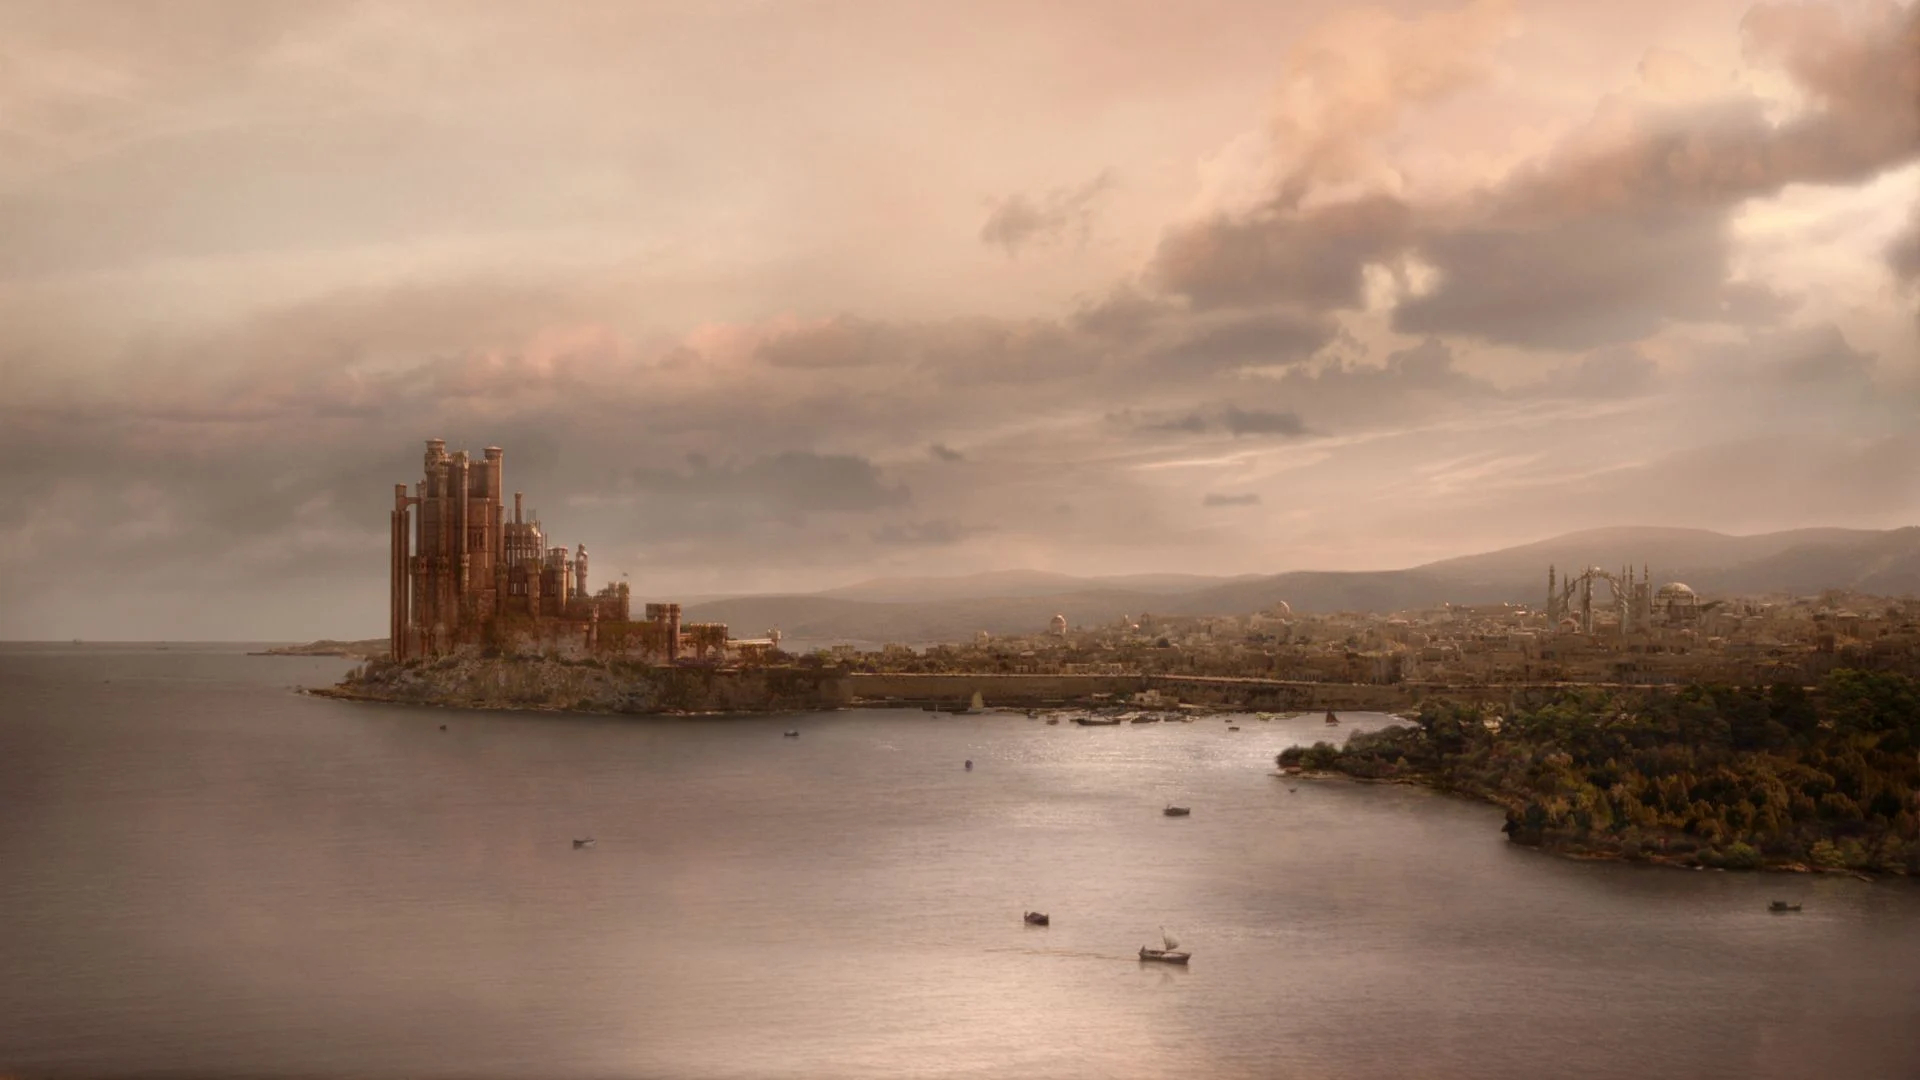 1920x1080 Game of Thrones Landscape Wallpapers Top Free Game of Thrones Landscape Backgrounds